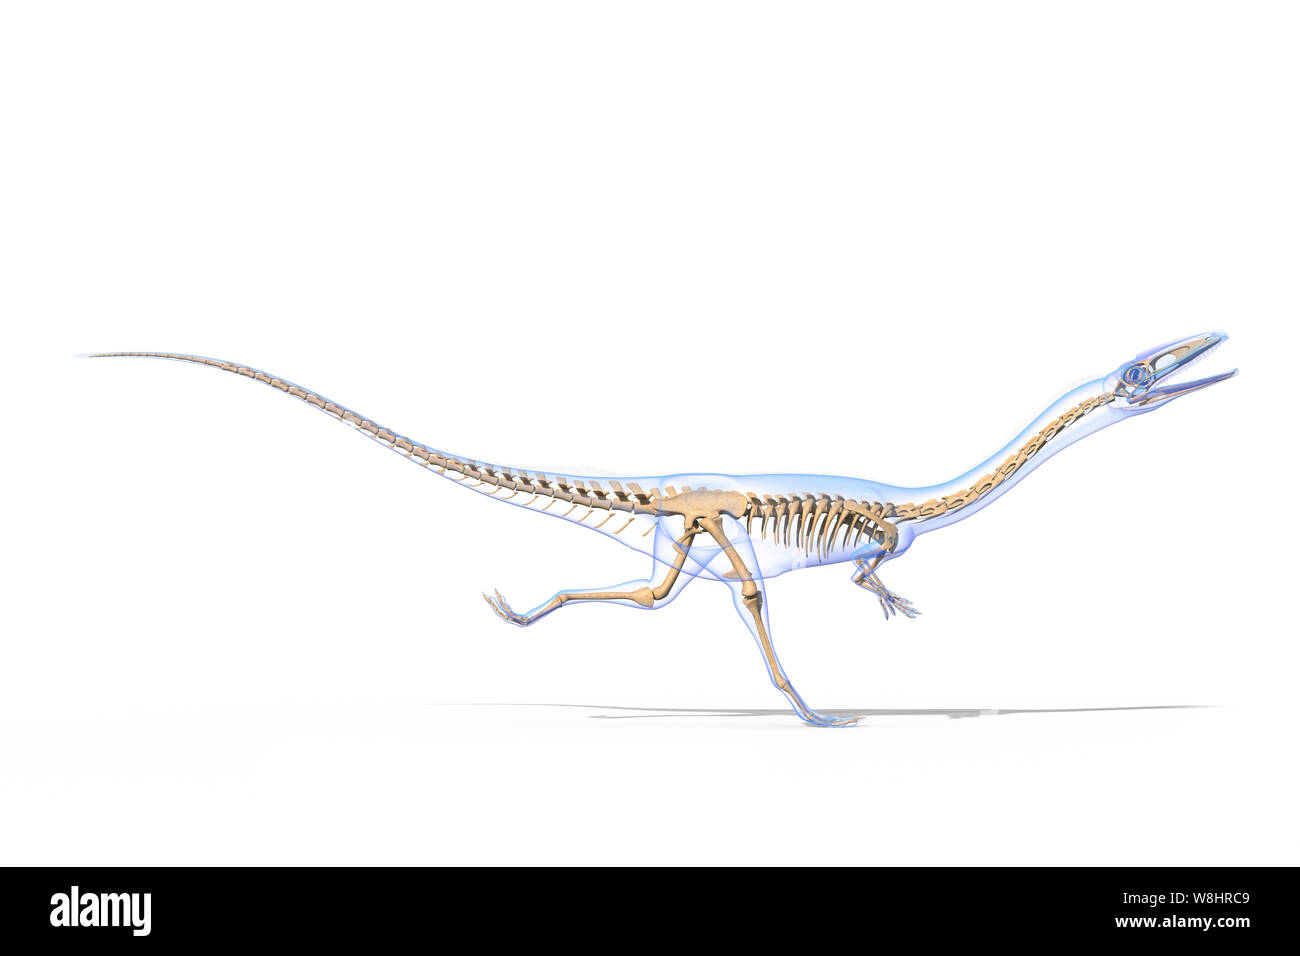 Coelophysis dinosaur running, skeletal structure, illustration. These dinosaurs lived in the Triassic period, about 203-196 million years ago. Stock Photo